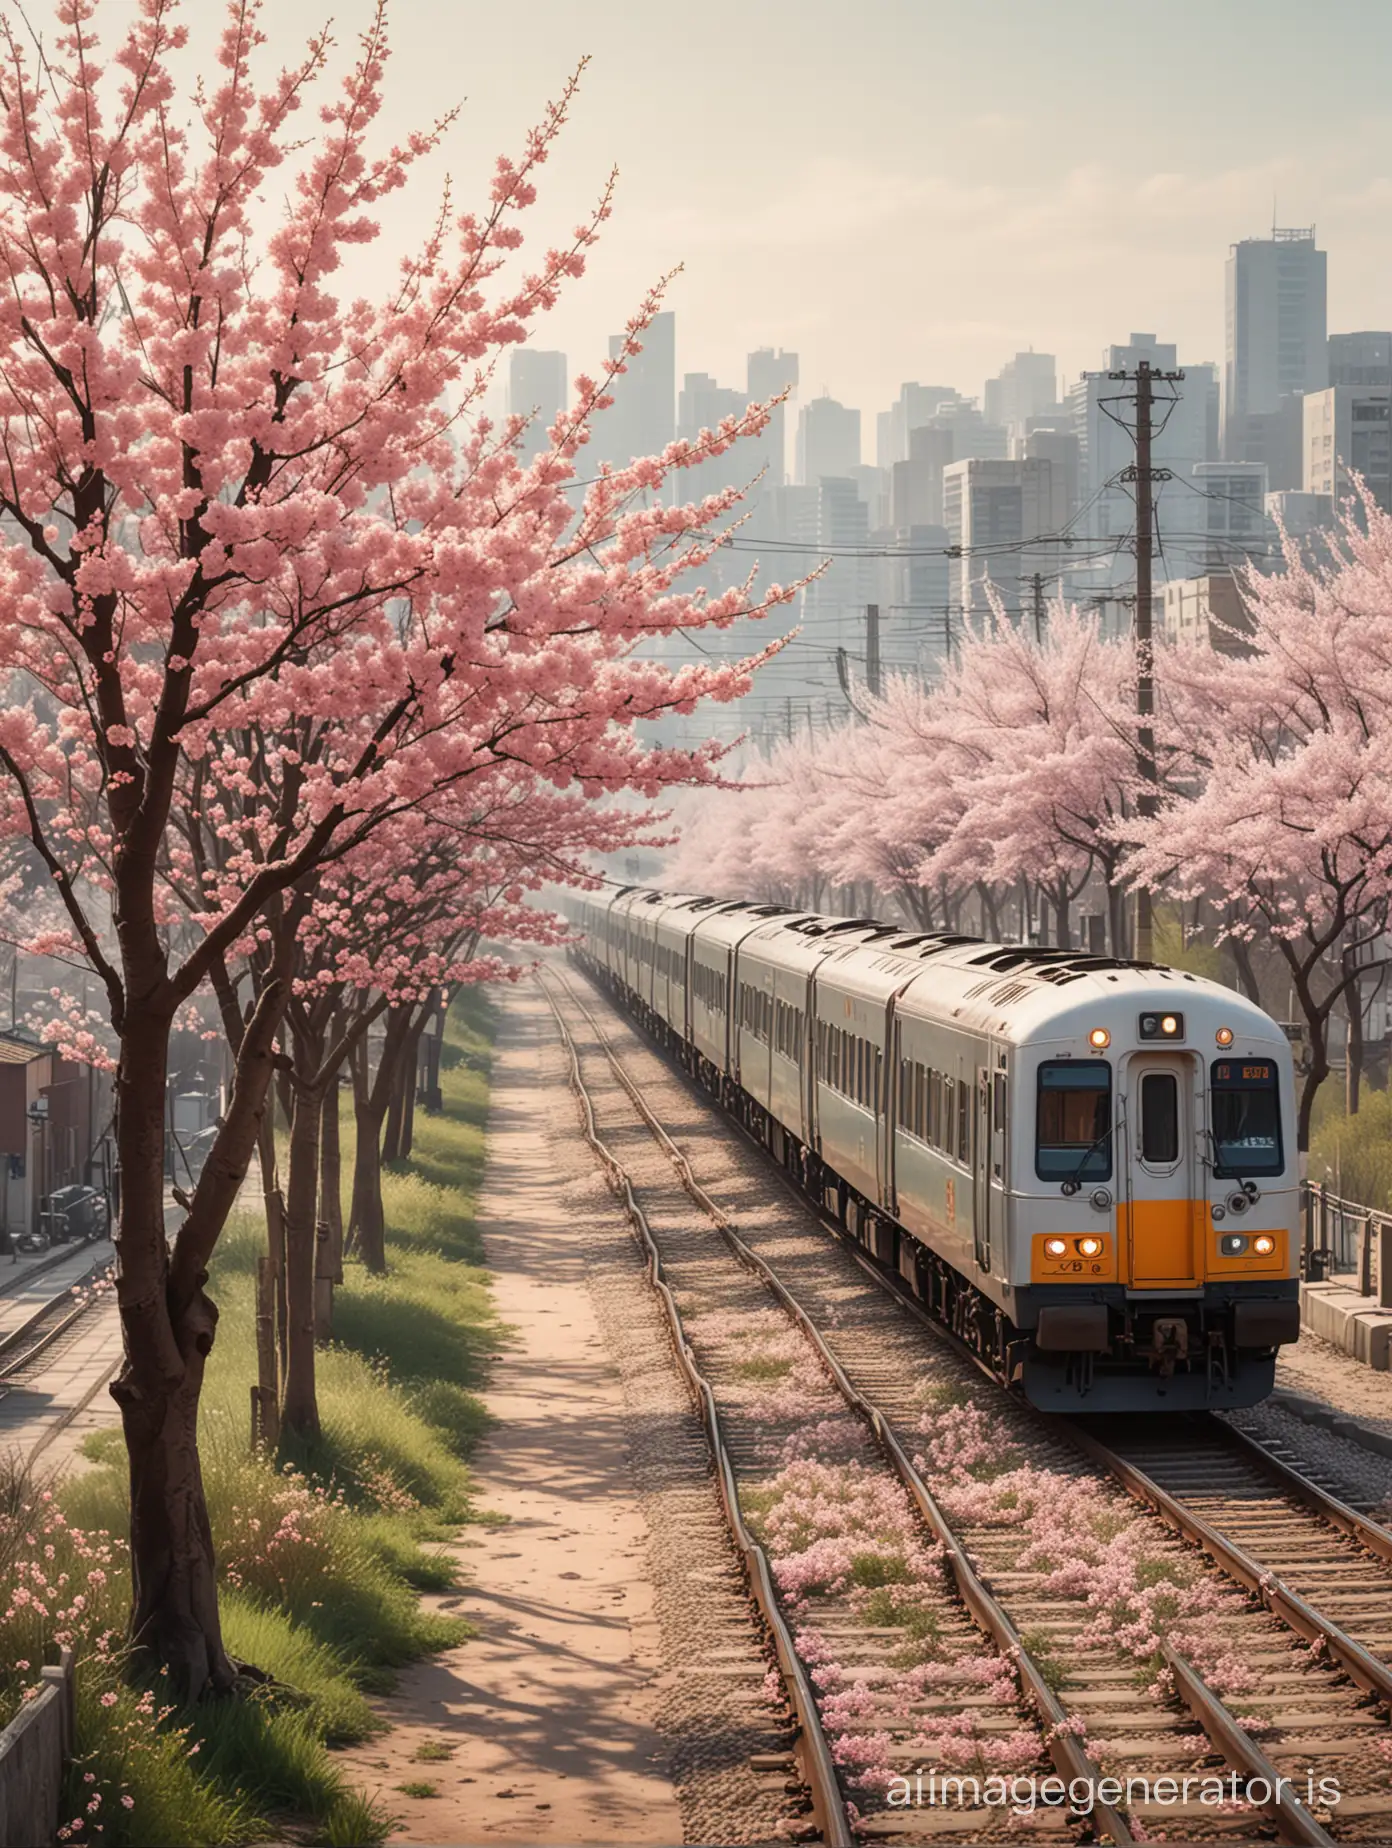 Urban illustration 
A long train bound for spring
peach blossoms in full bloom 
breath of spring and soft natural light 
urban landscape photographer 
